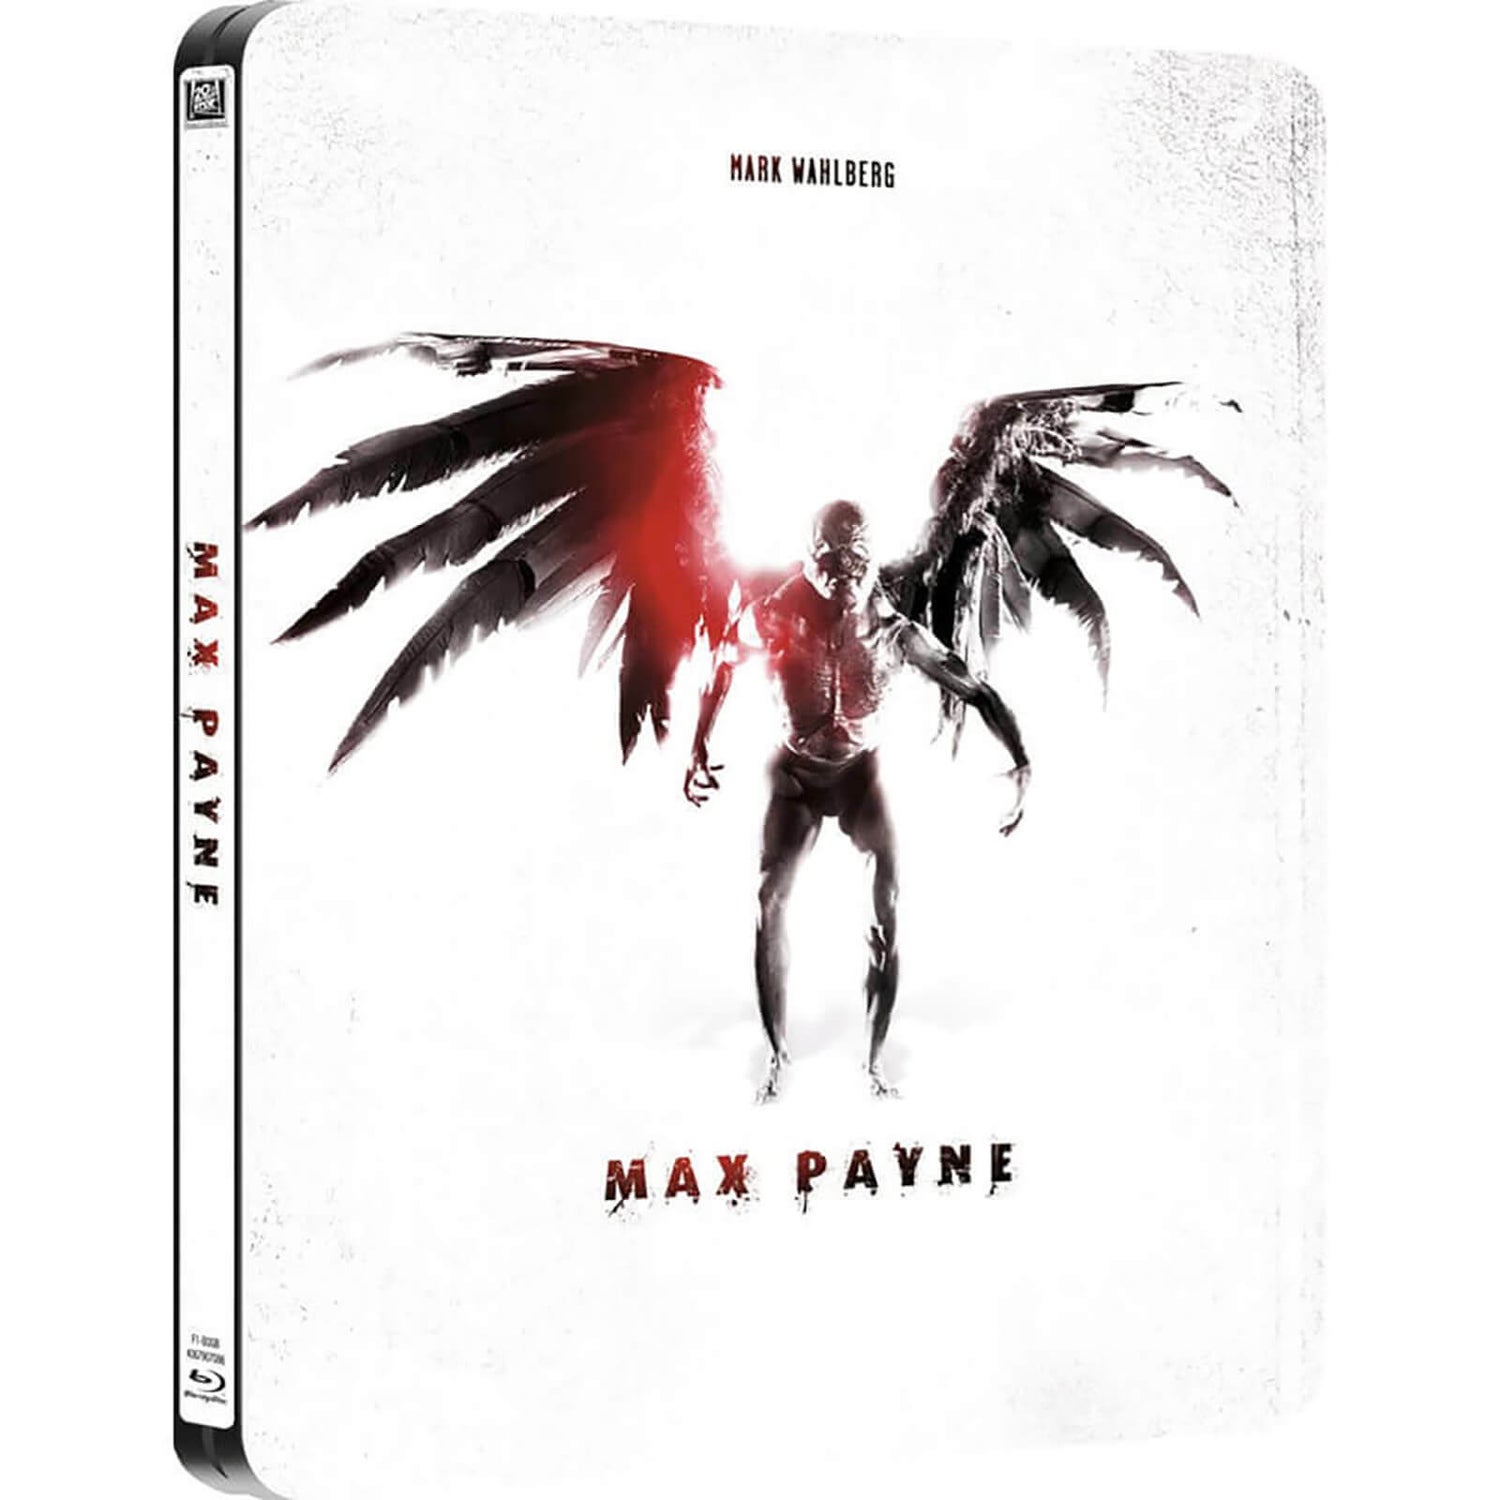 Max Payne - Zavvi Exclusive Limited Edition Steelbook (Limited to 2000 Copies)